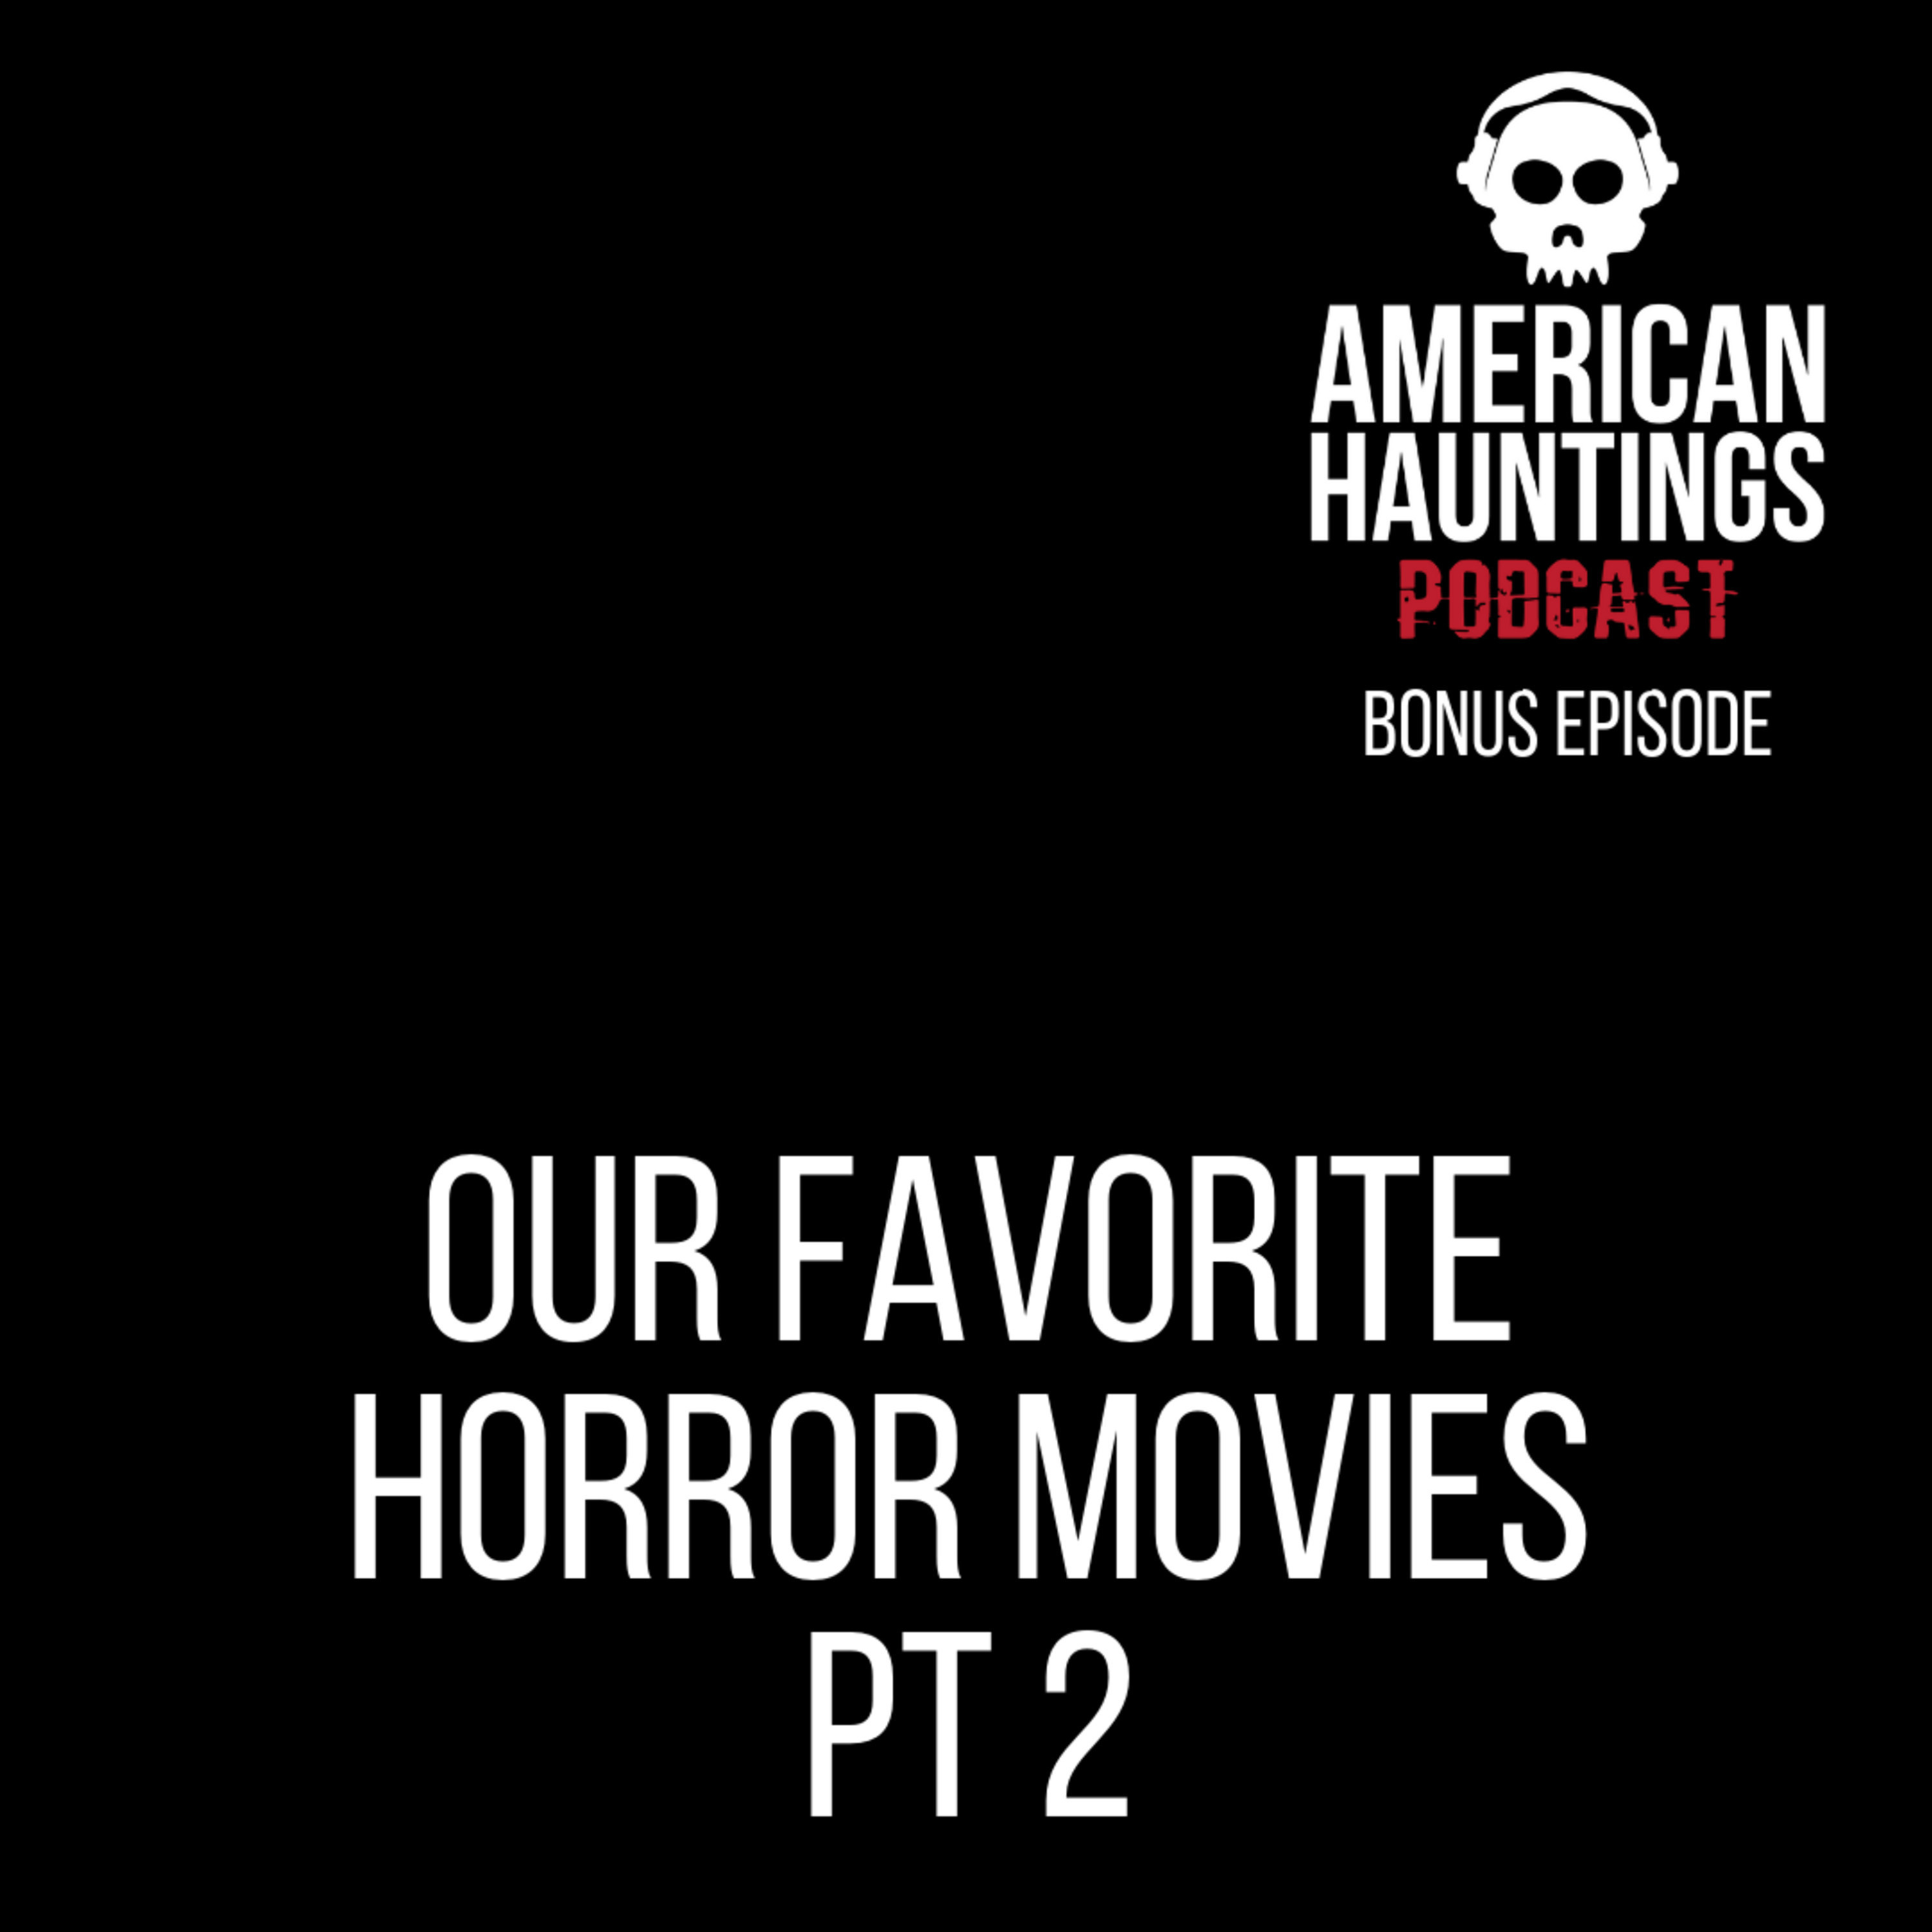 Our Favorite Horror Movies pt 2